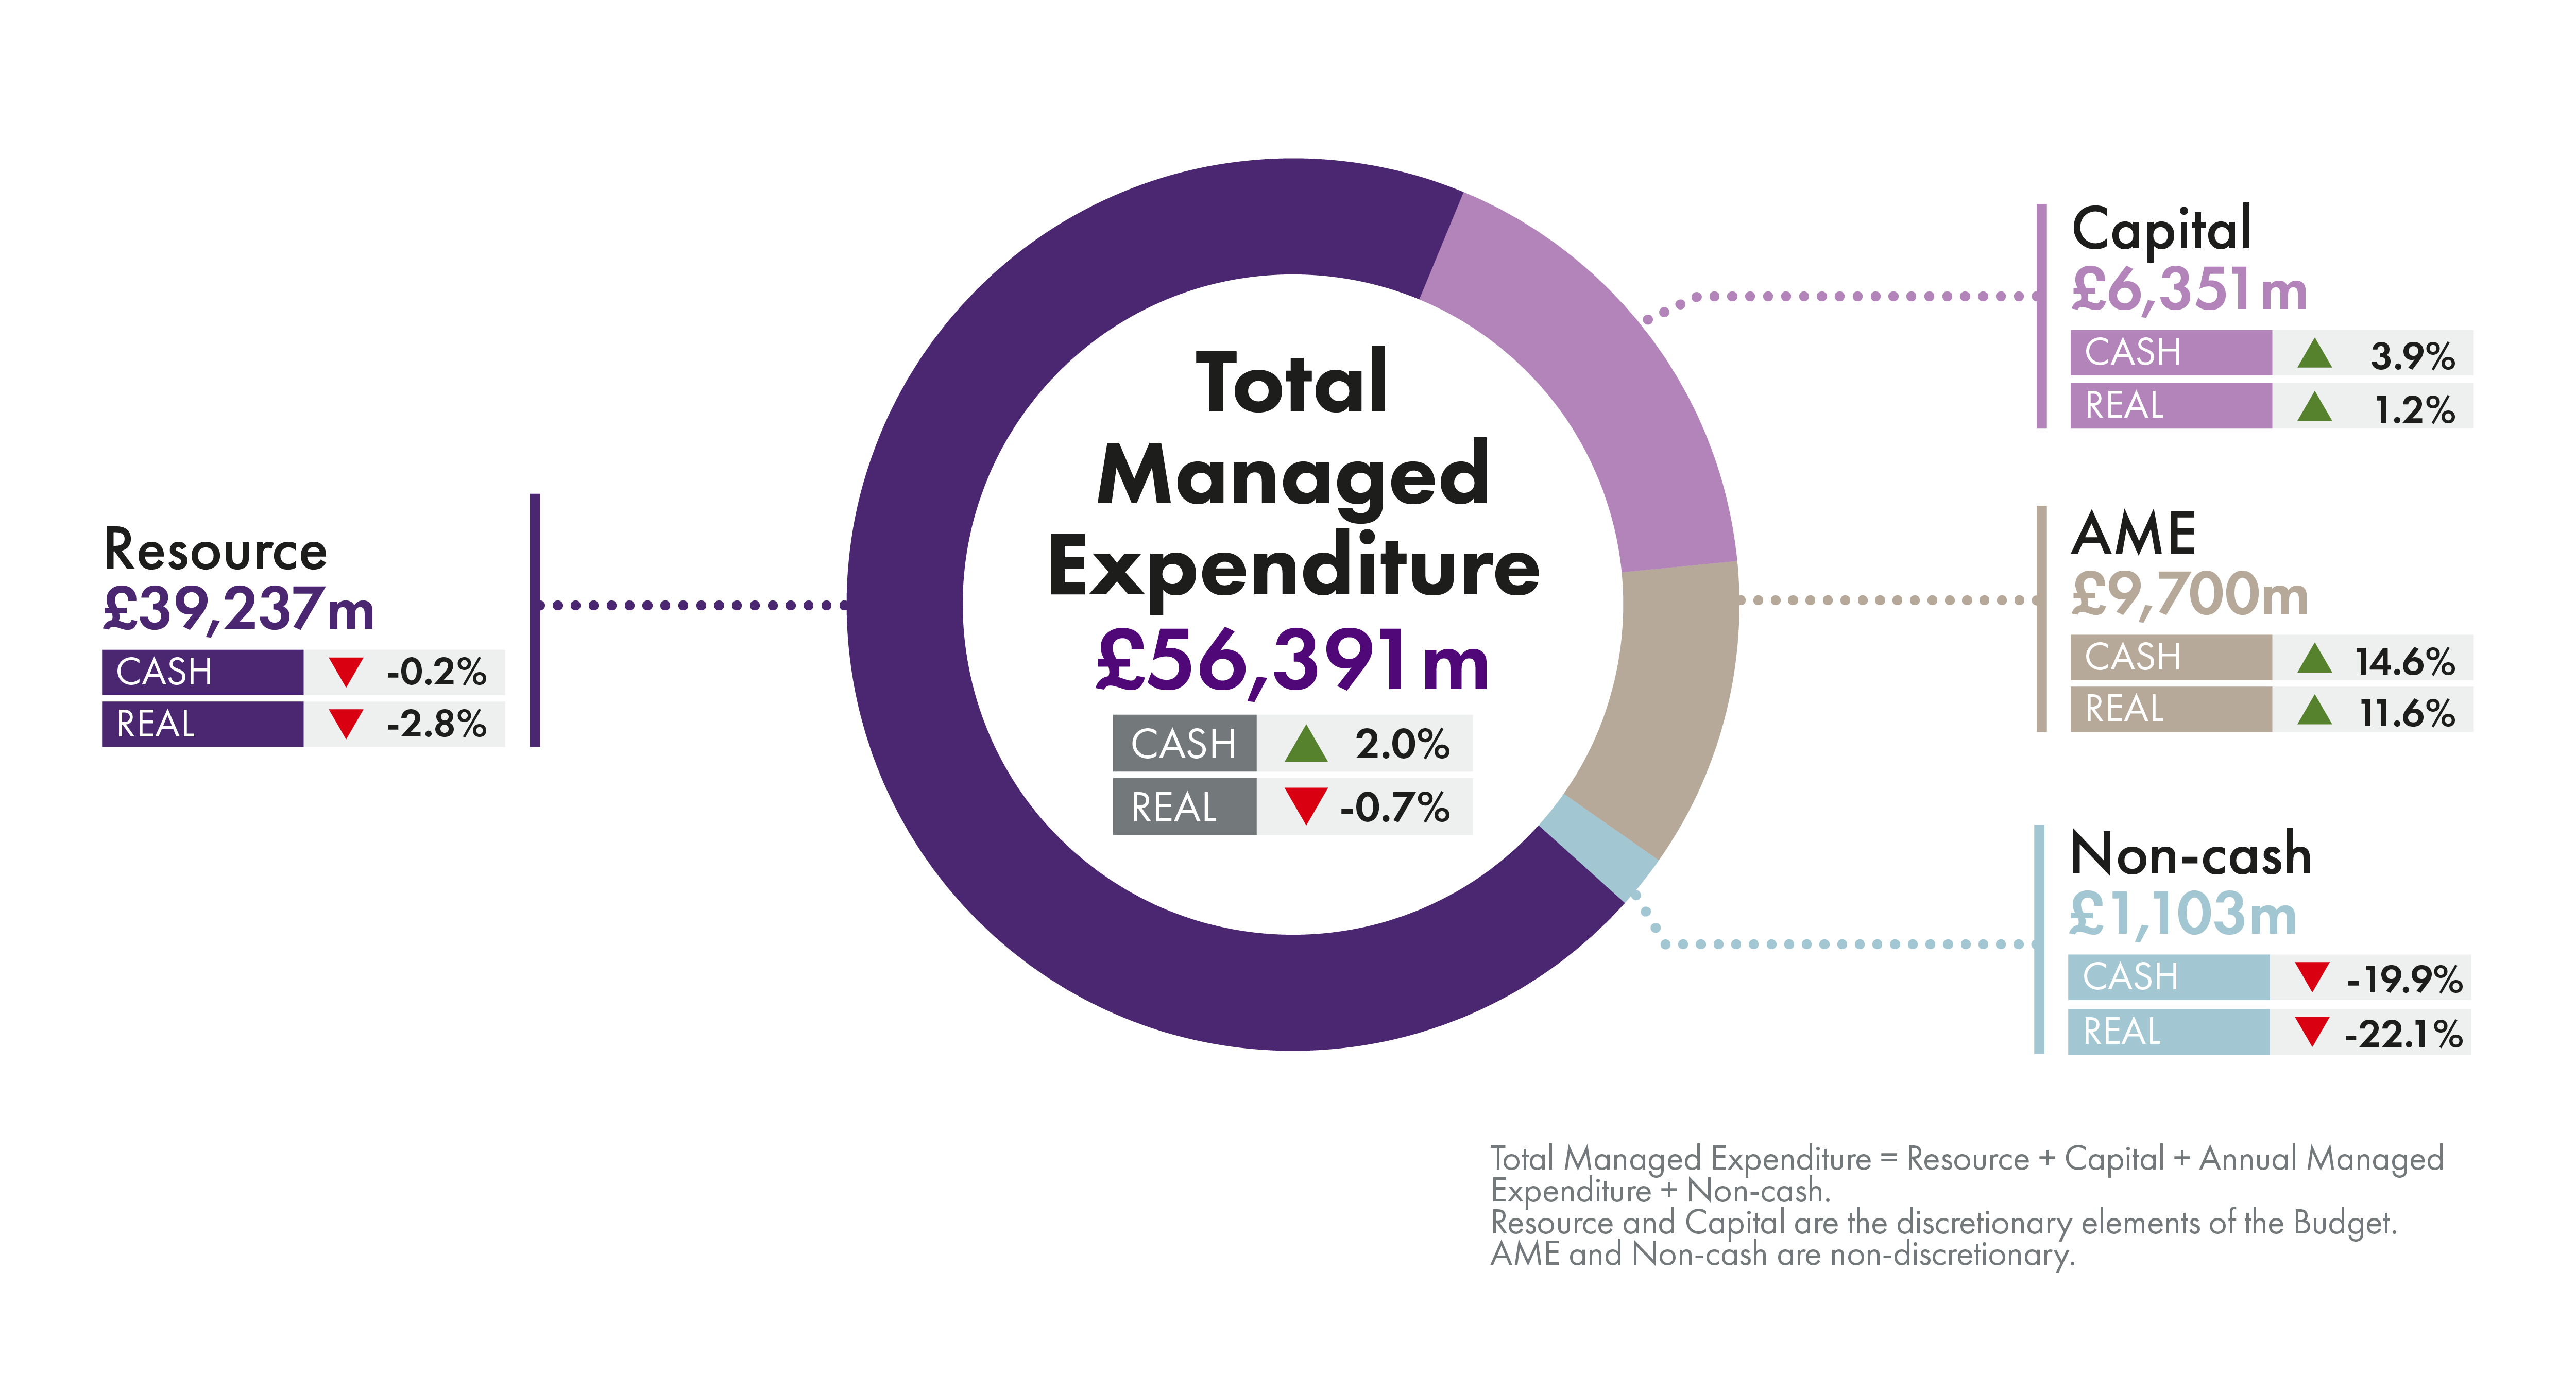 Total Managed Expenditure (TME) comprises Fiscal Resource, non-cash Resource, Capital and Annually Managed Expenditure (AME). TME in 2022-23 is £56,391 million. Figure 1 shows how this is allocated and how it changes - key figures are TME decreases by 0.7% in real terms, resource decreases by 2.8% in real terms and capital increases by 1.2% in real terms.